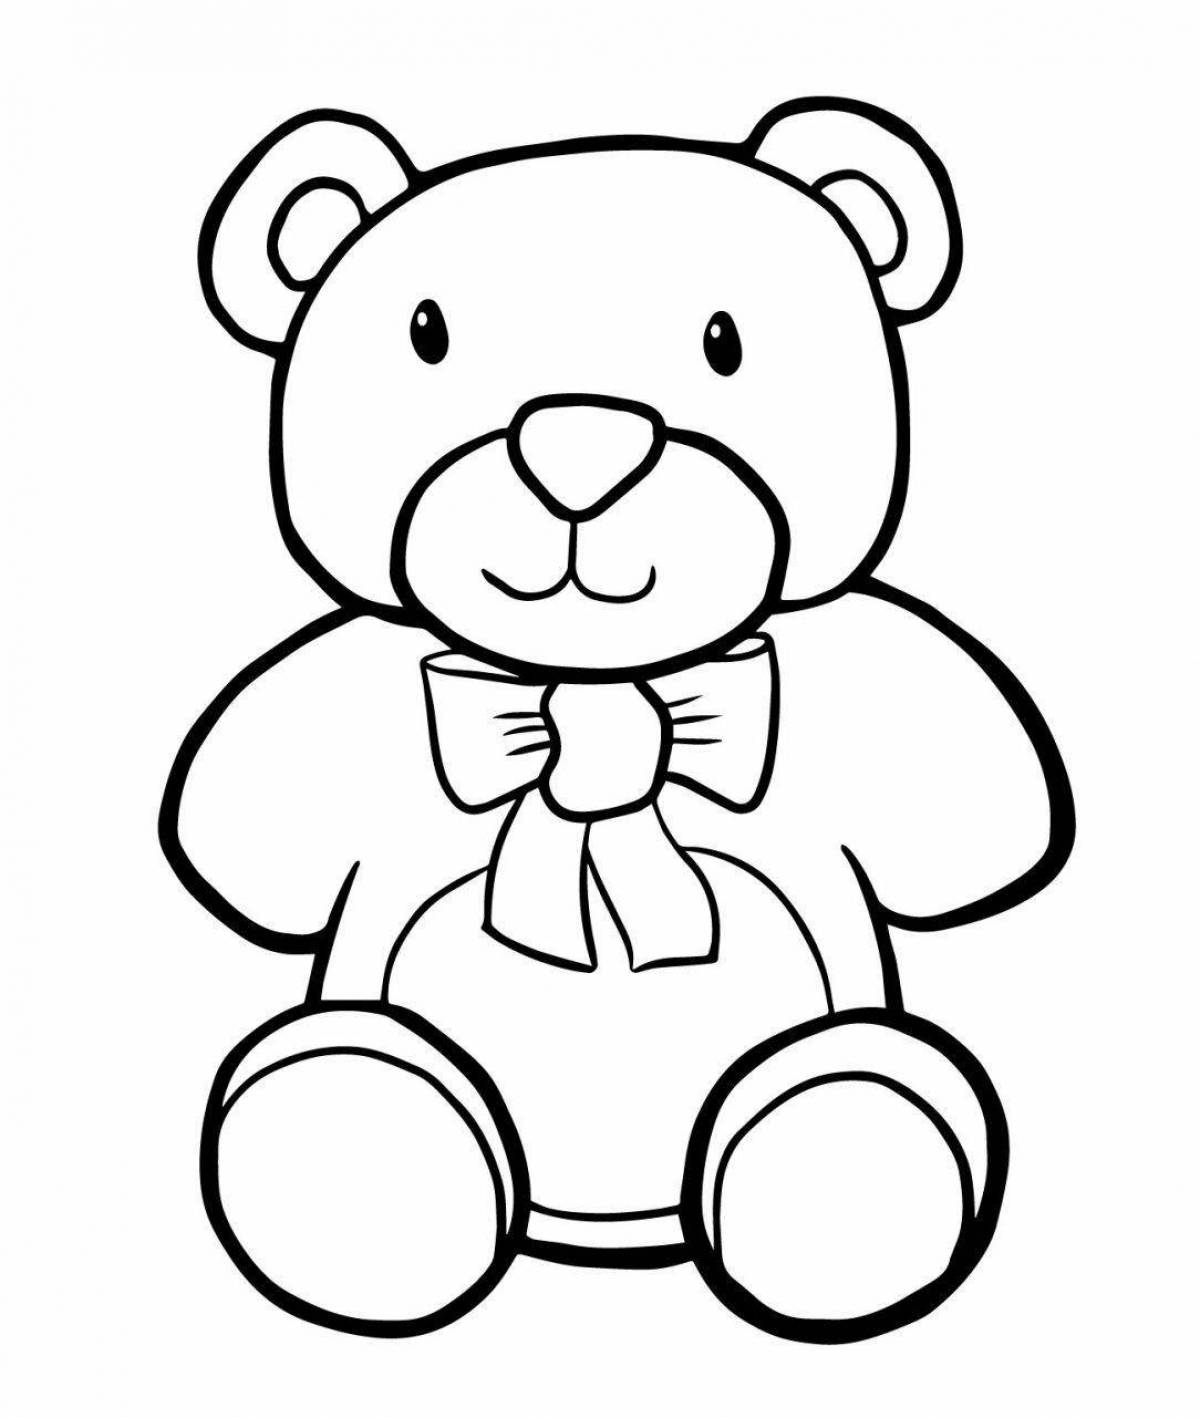 Live teddy bear coloring book for 5-6 year olds